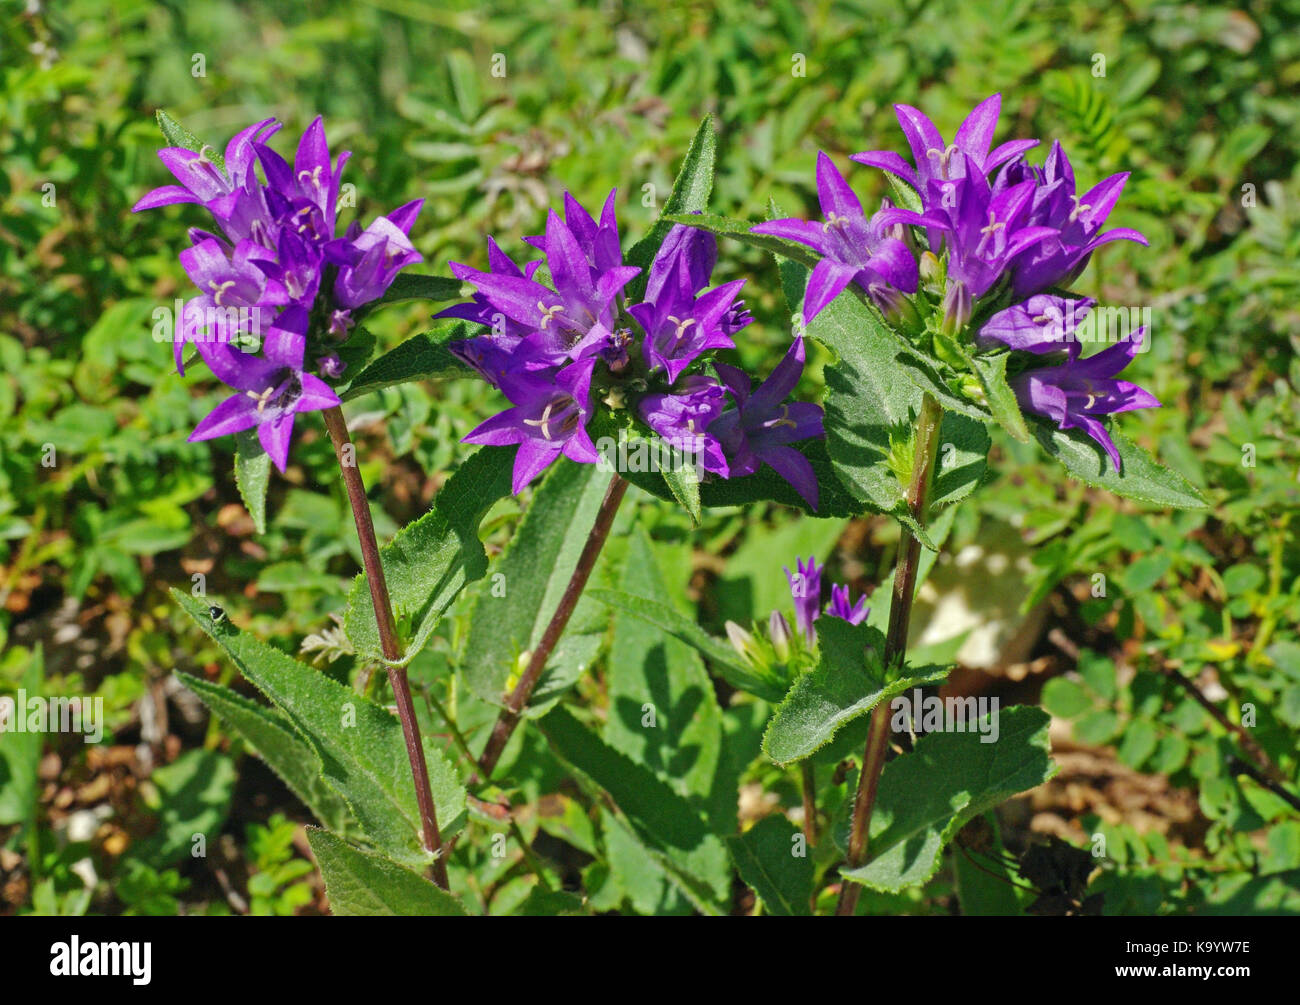 Campanula glomerata, the Clustered bellflower or Dane's blood, from the  family campanulaceae Stock Photo - Alamy